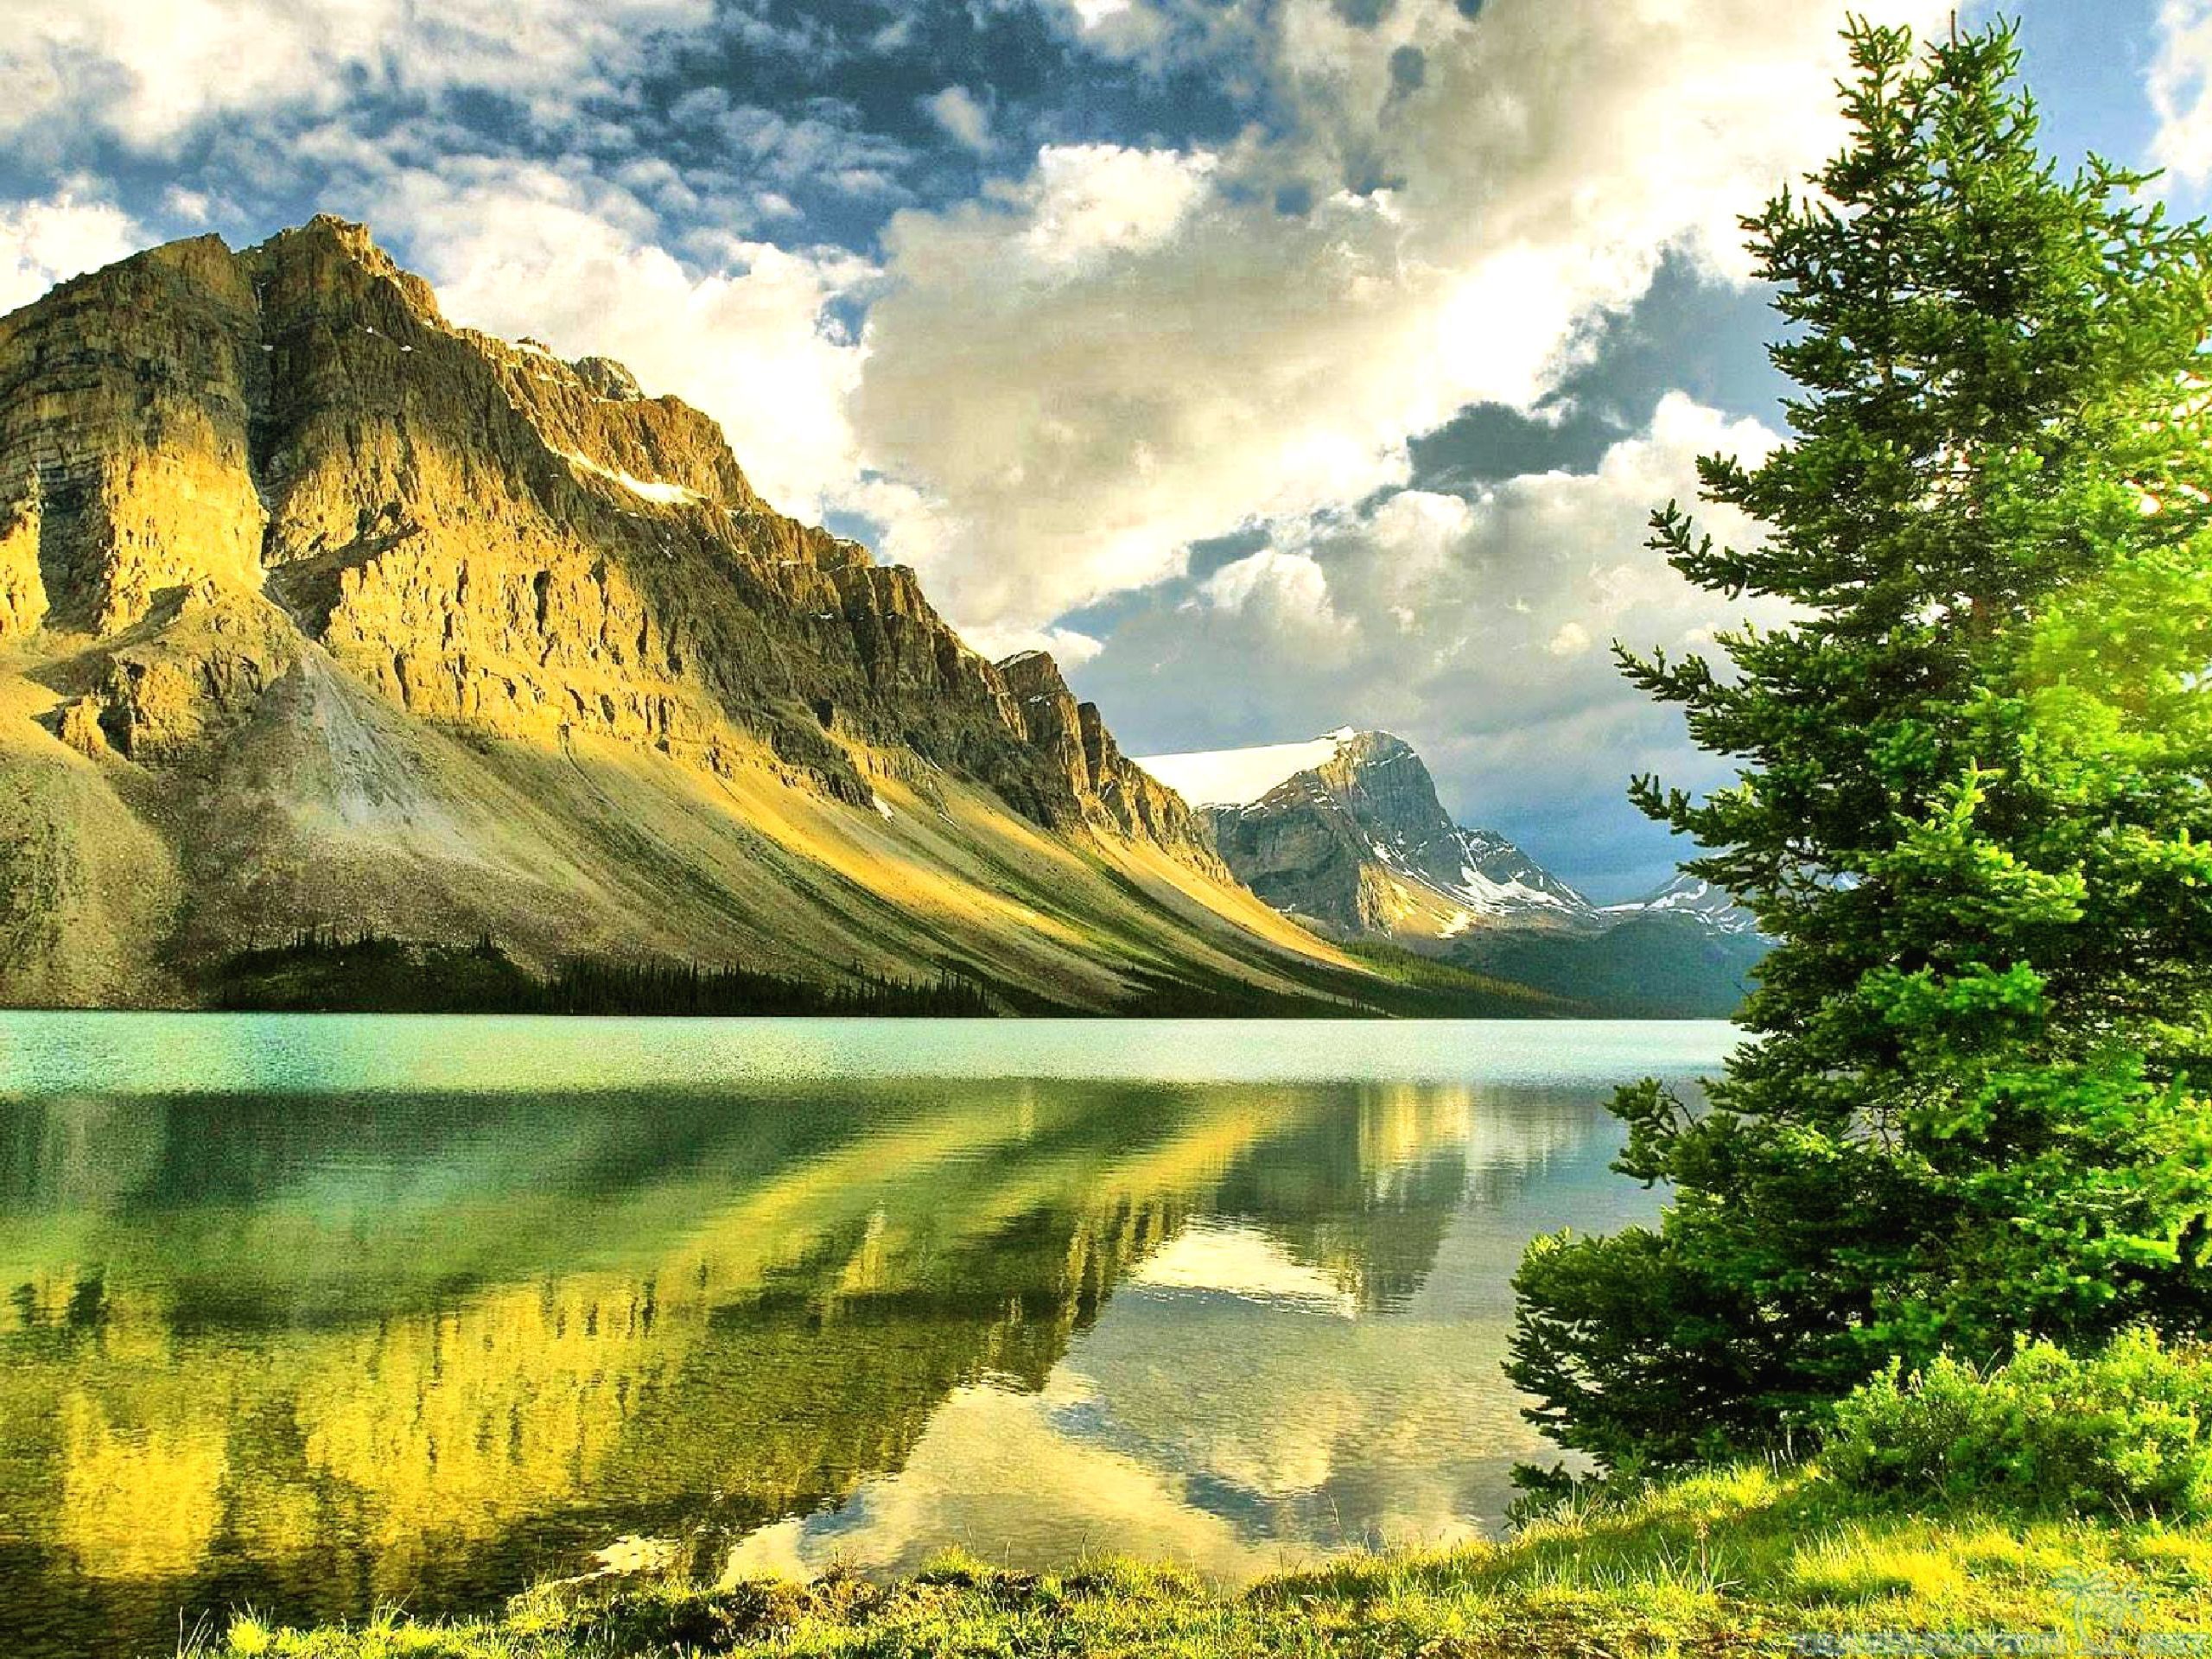 Nature Wallpaper High Quality Resolution. Download Wallpaper